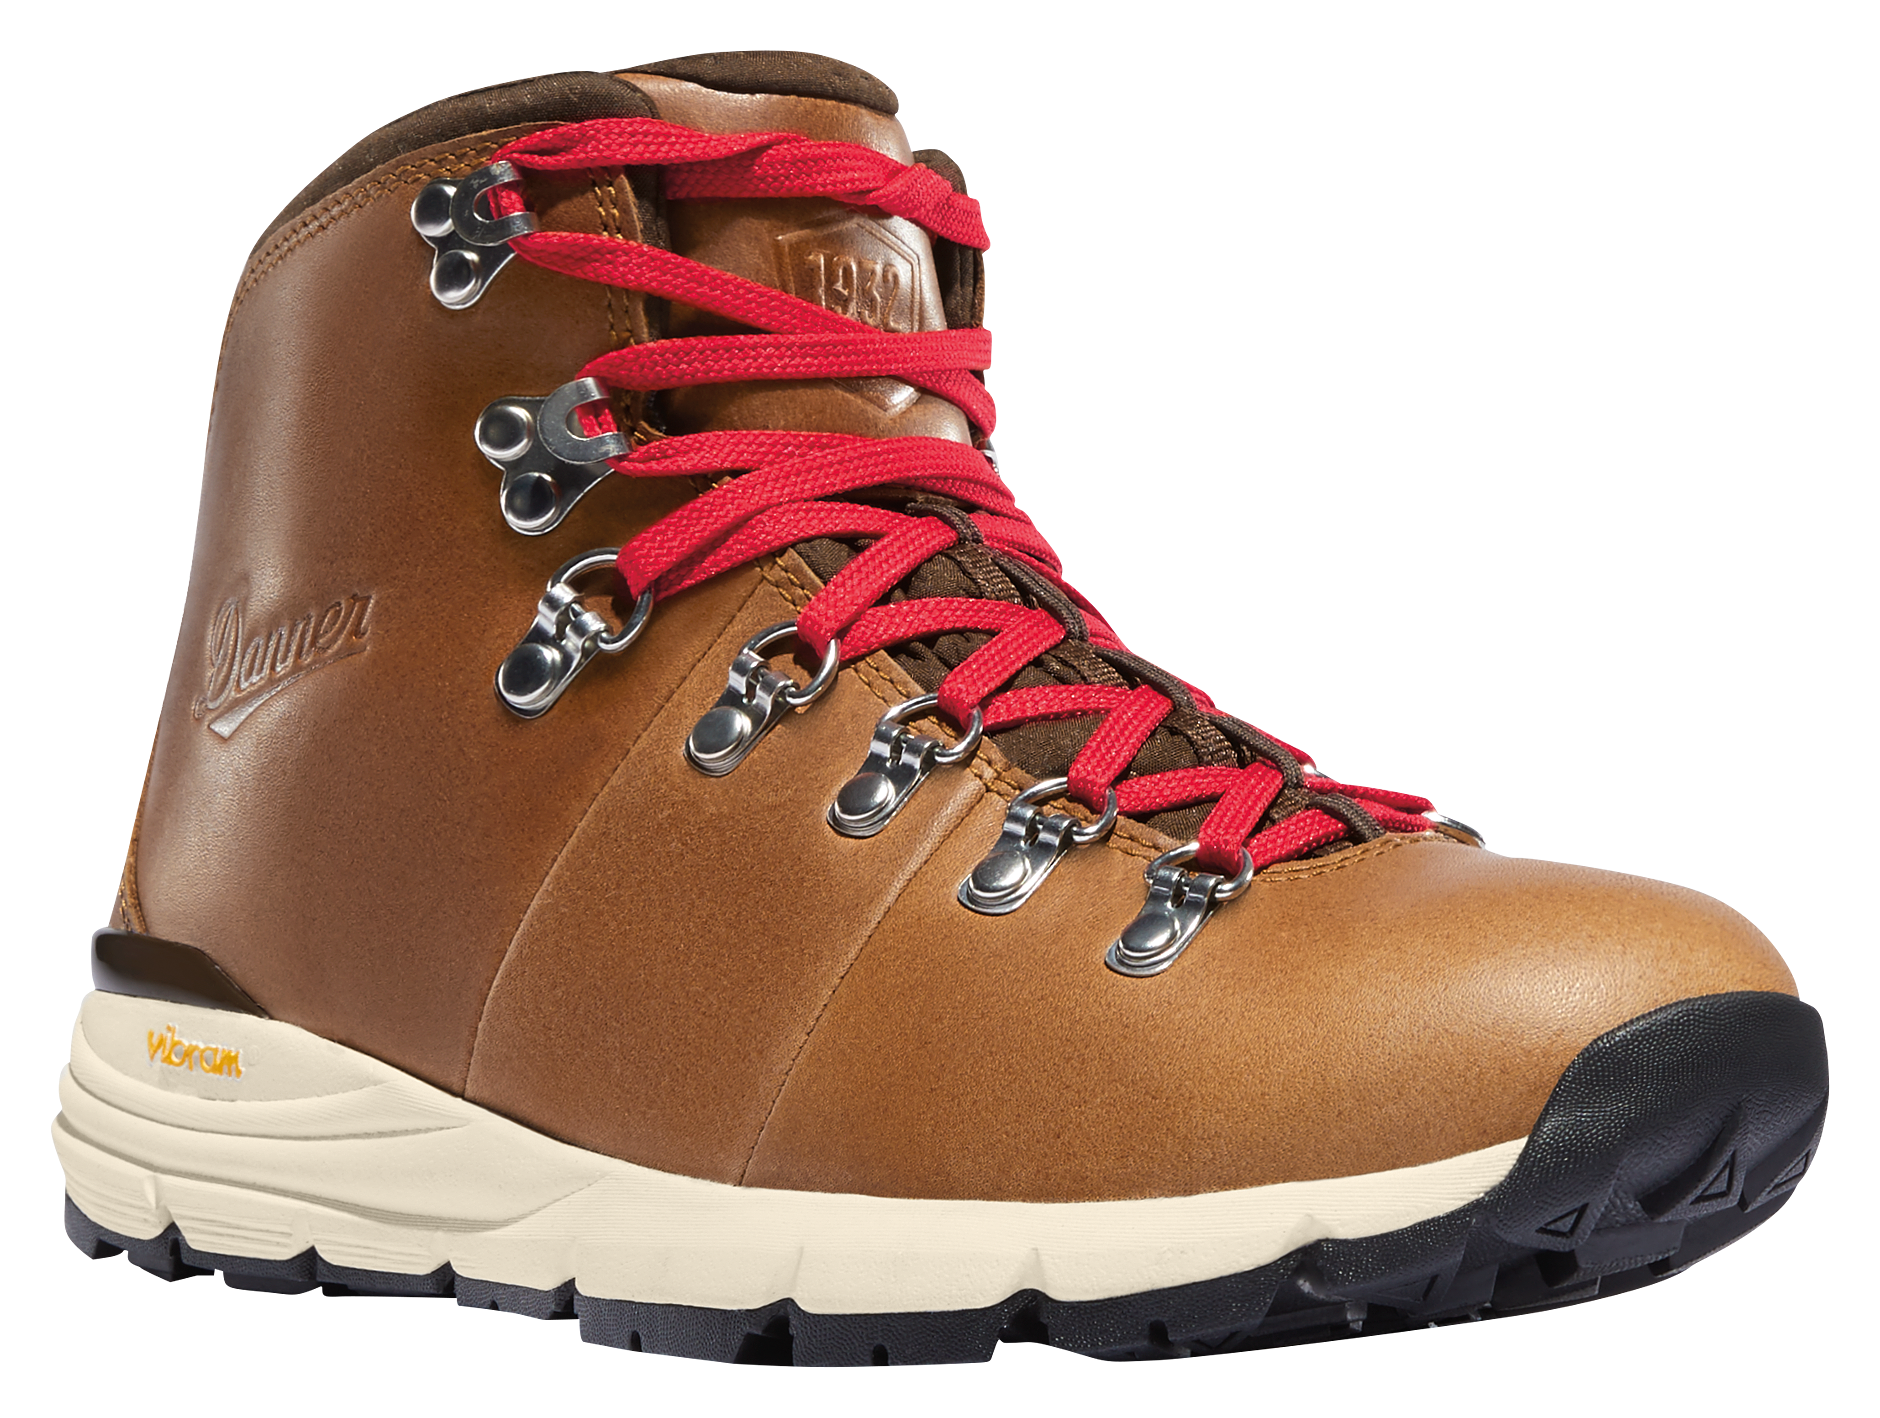 Danner Mountain 600 Leather Waterproof Hiking Boots for Ladies - Saddle Tan - 8.5M